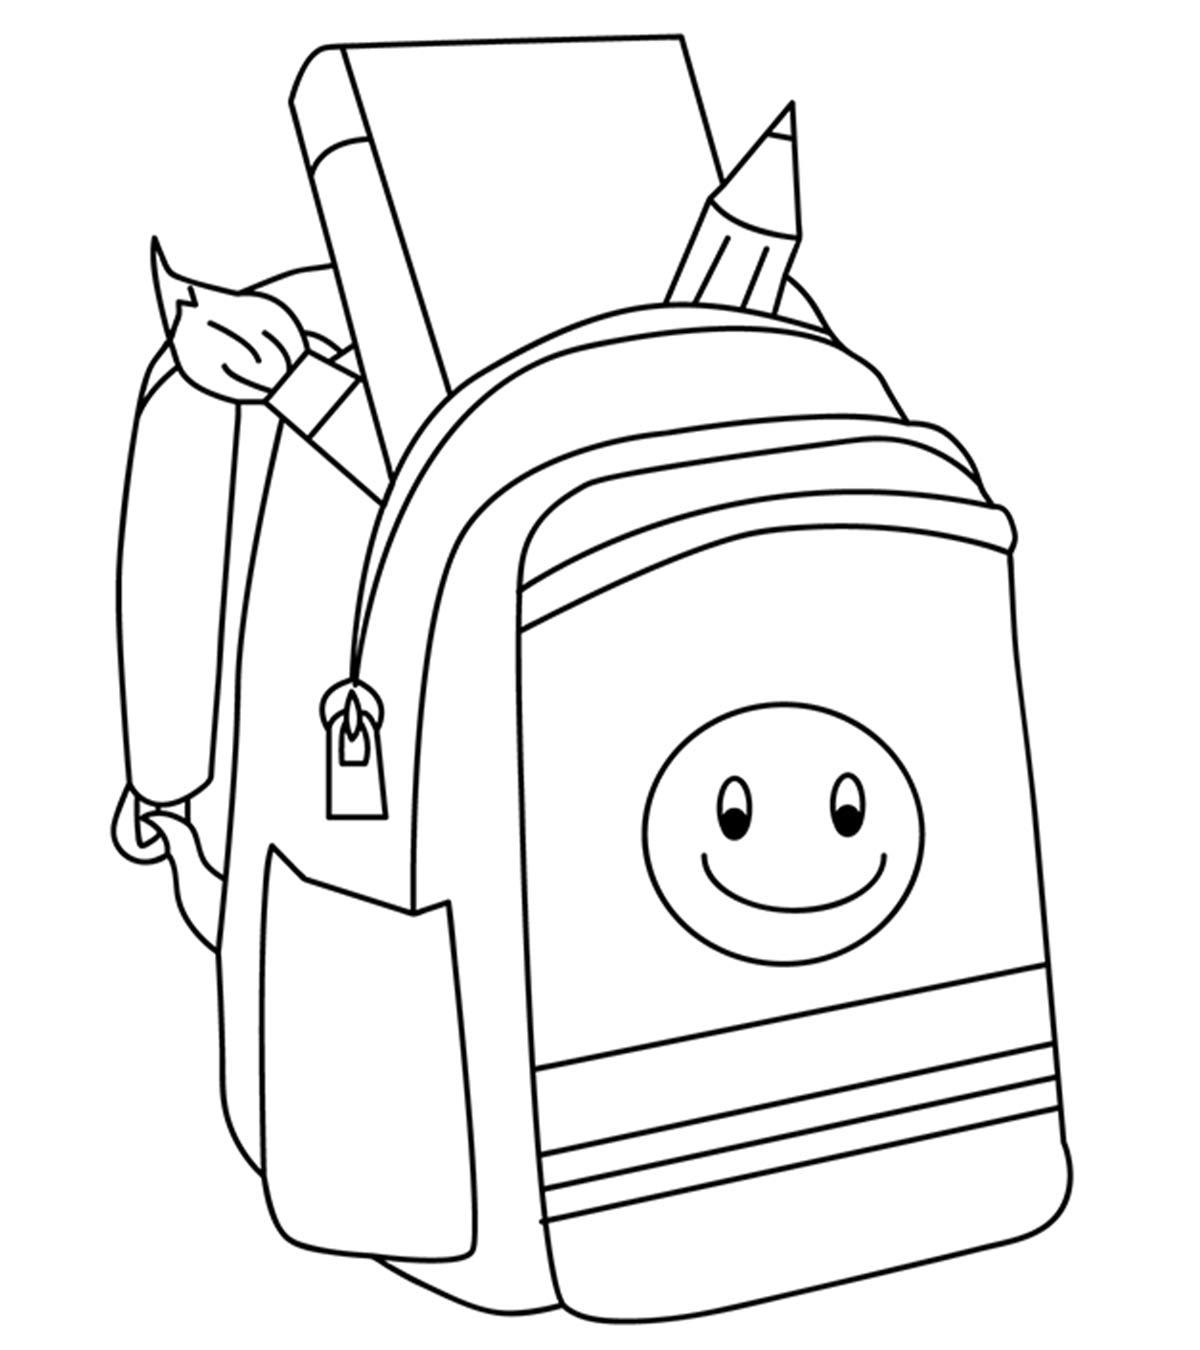 Backpack 2 Colouring - Kids Puzzles and Games